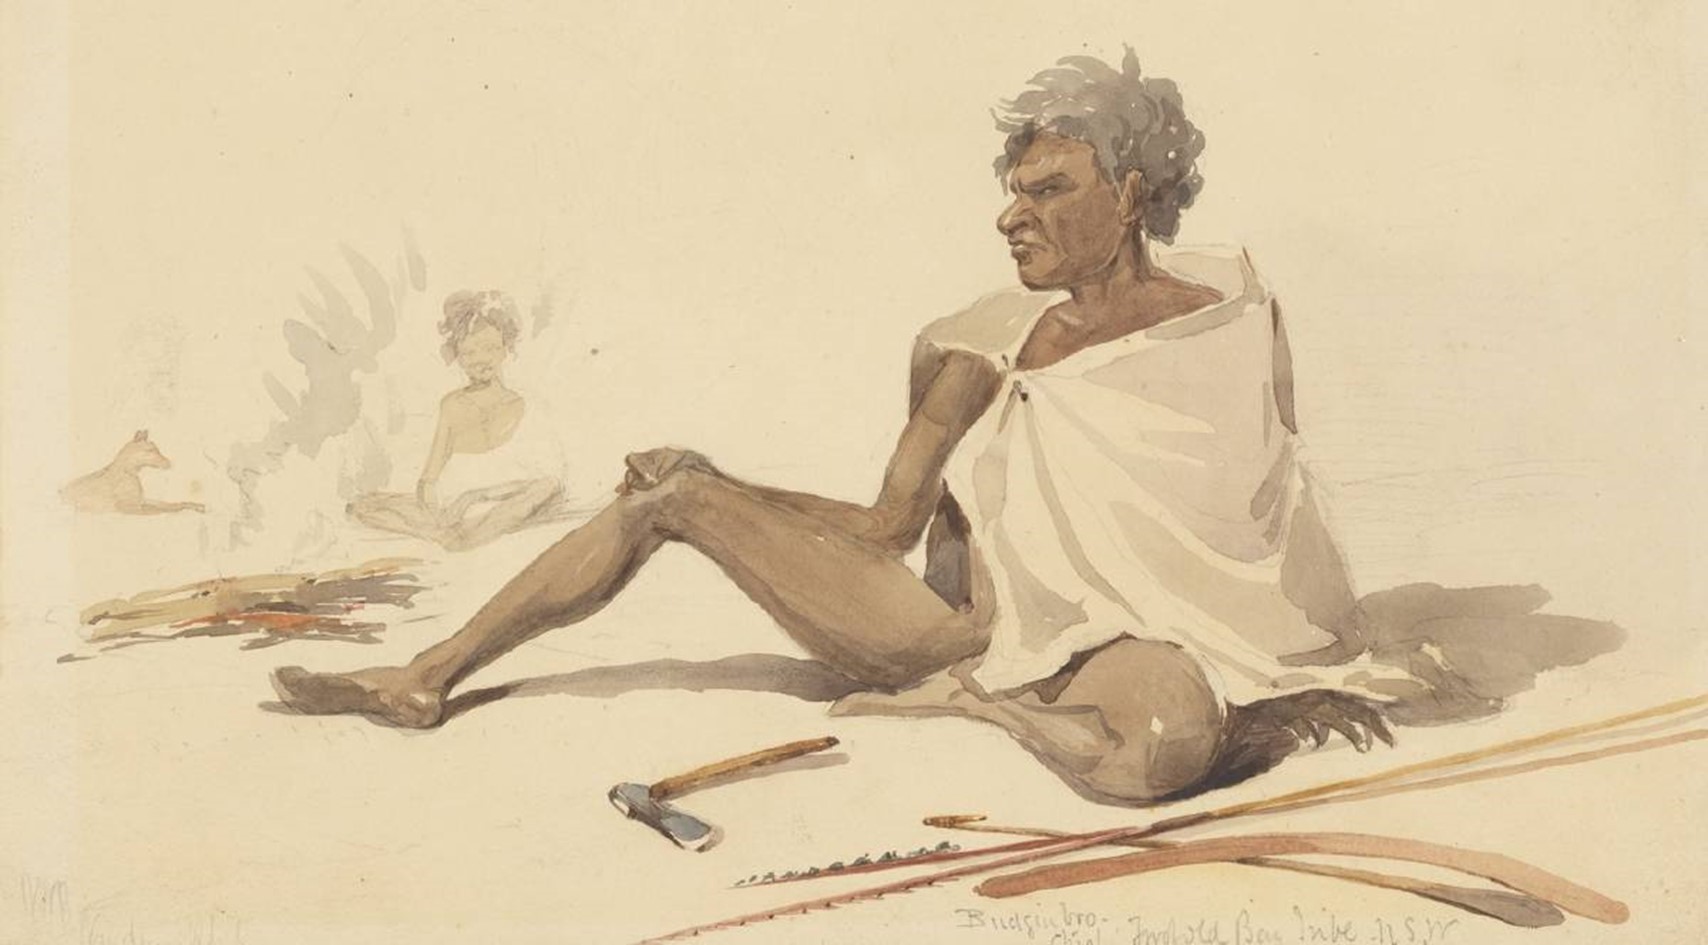 a painting of a seated individual with various tools on the ground around them, such as a boomarang and axe, and another figure in the background